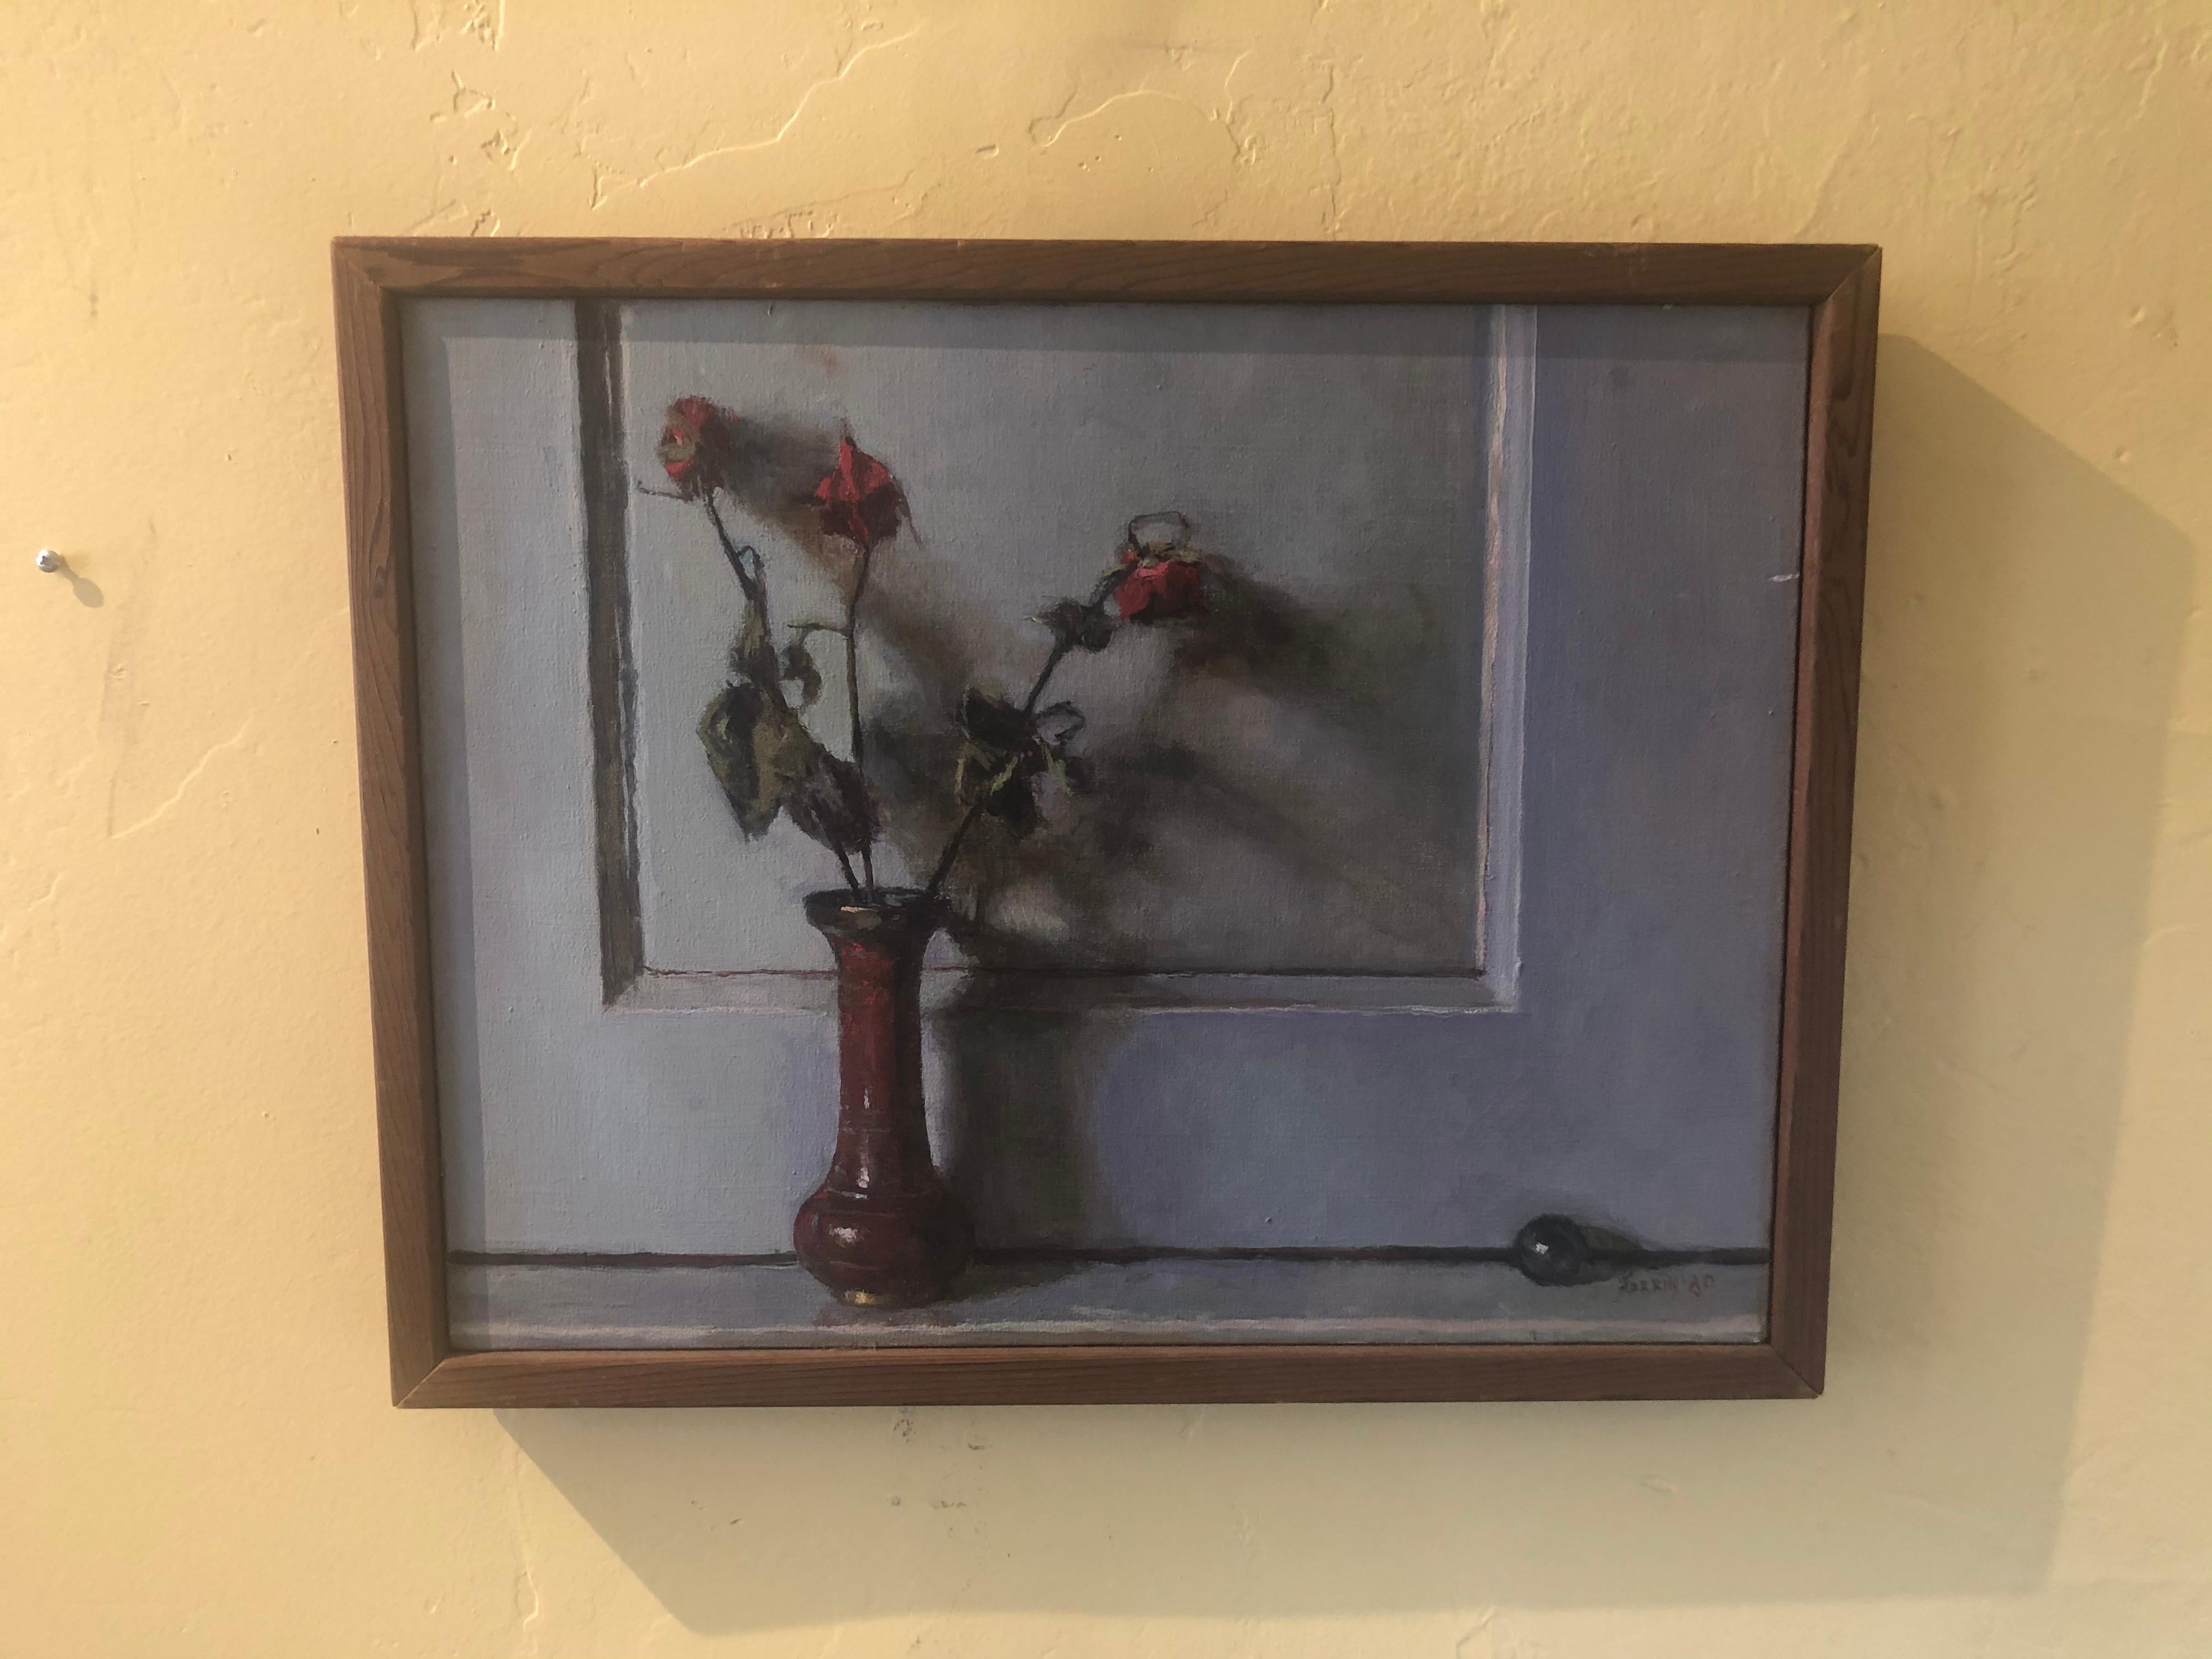 Original oil on canvas painting by listed American artist Doug Ferrin, circa 1990s. The piece is custom framed in a thin rustic wood frame that gives the piece a lot of character. The canvas is 18